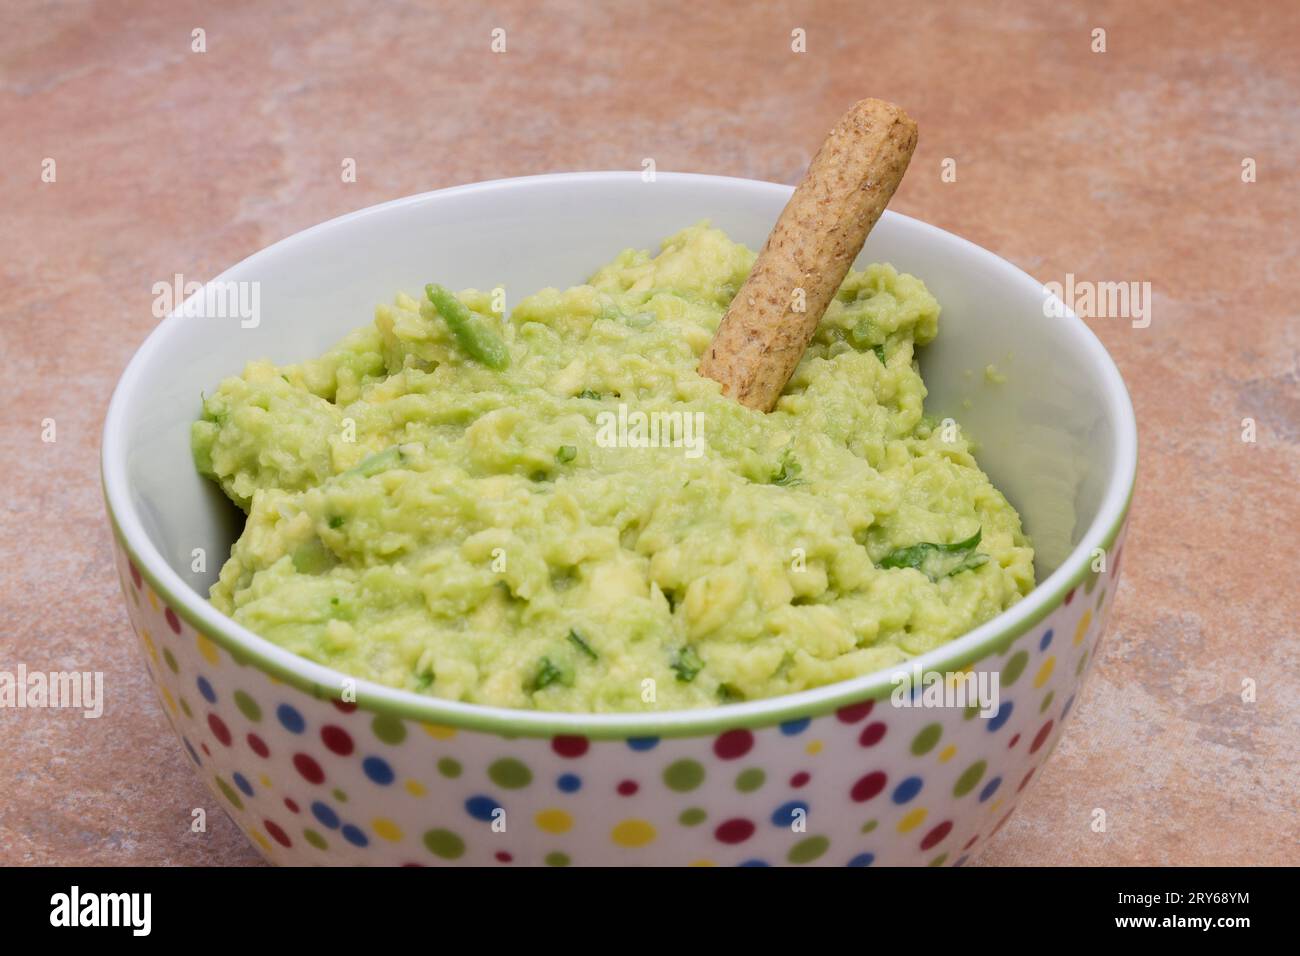 Close-Up View  of Homemade Guacamole, Nestled in a Decorative Bowl Adorned with Vibrant Color Dots Set Against a Rustic Kitchen Countertop with Stone- Stock Photo